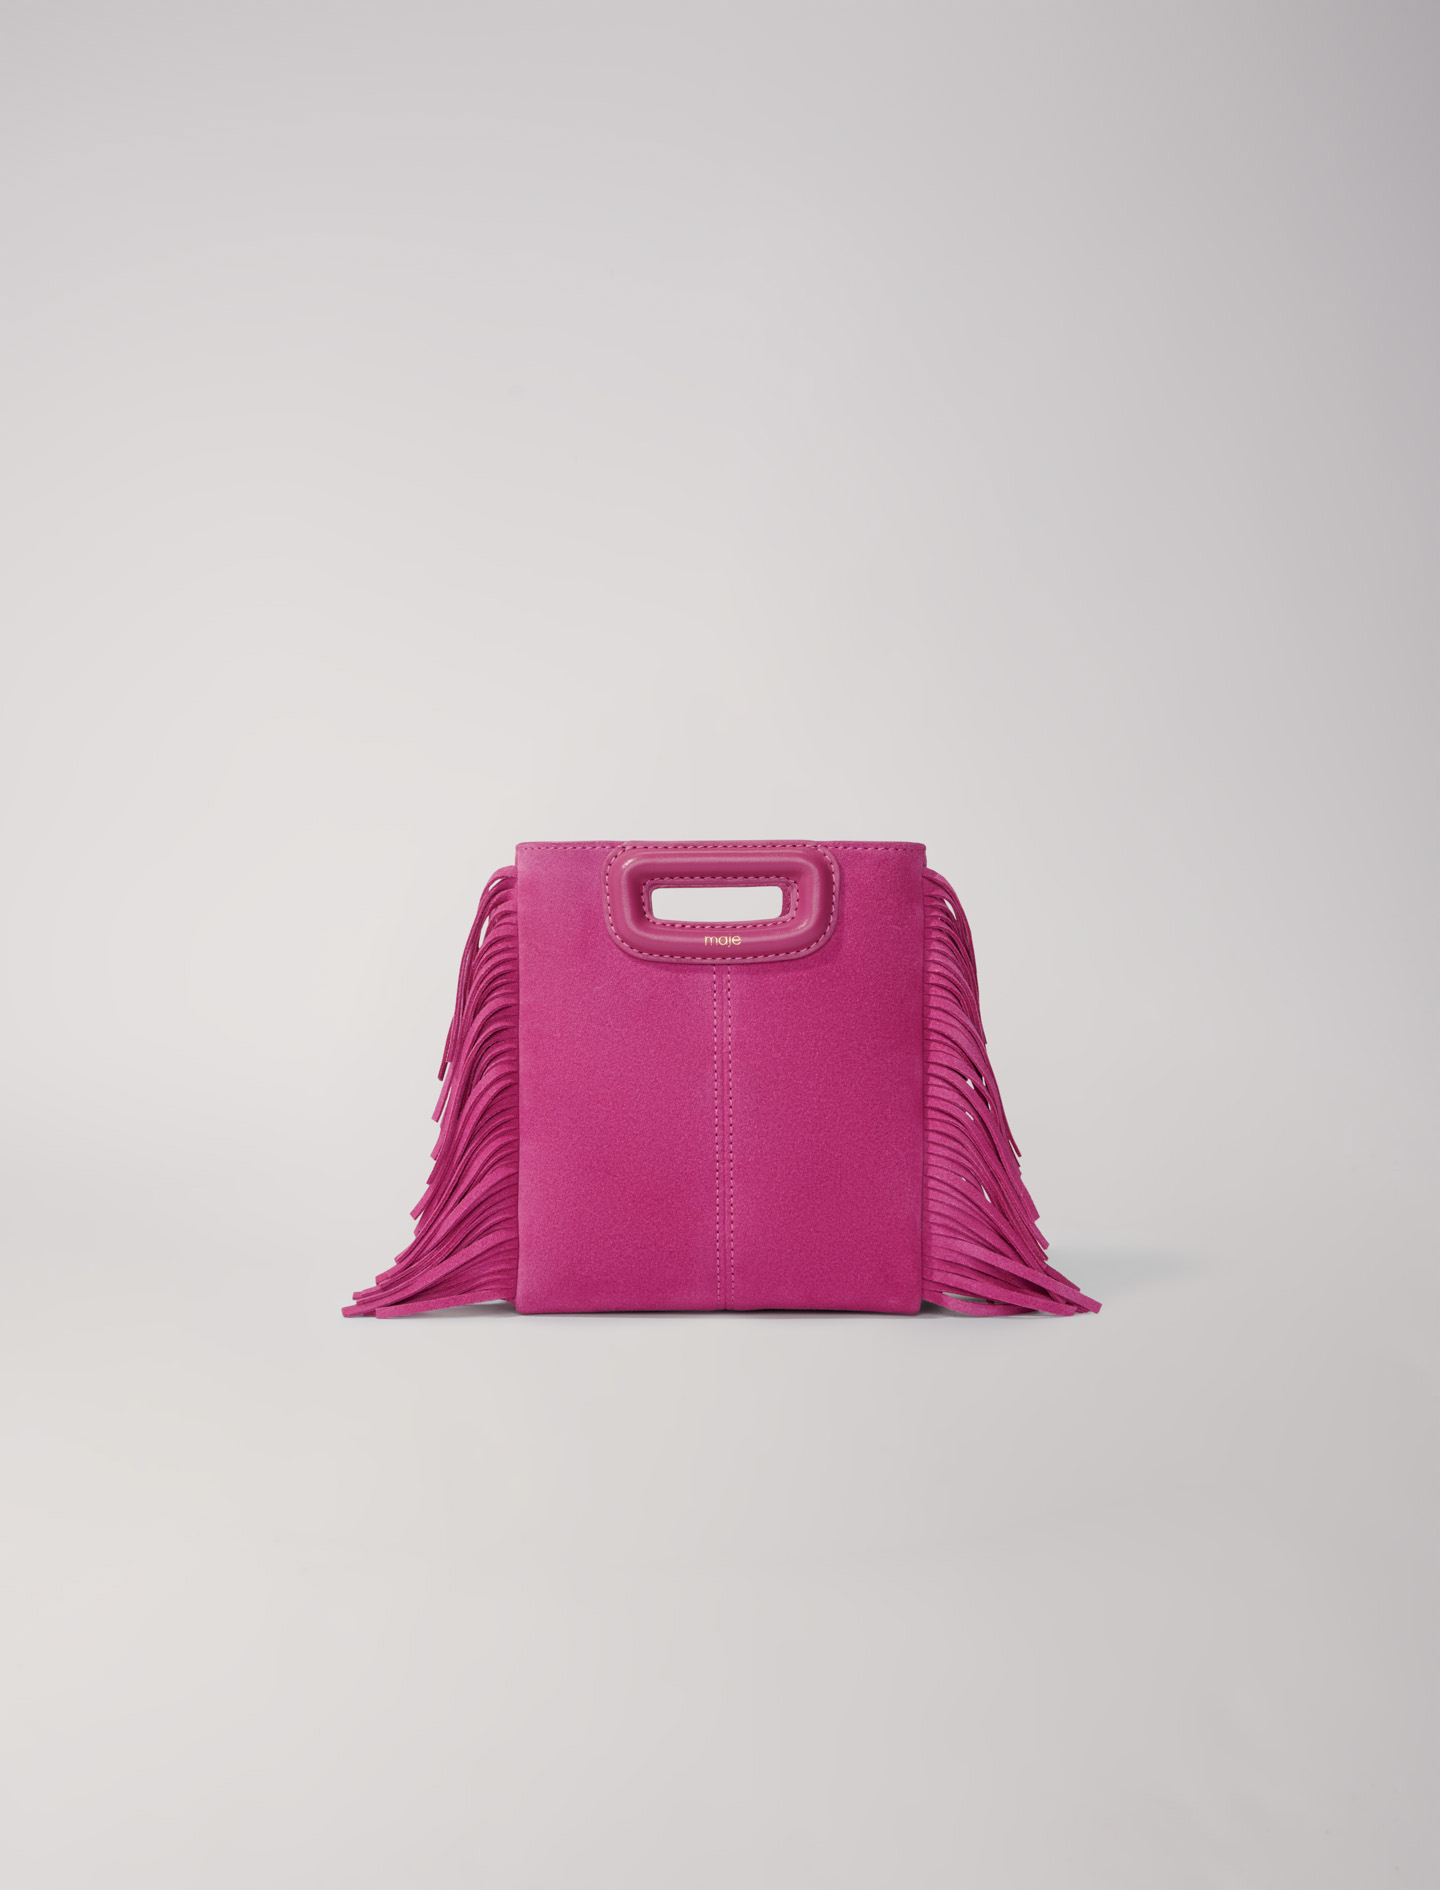 Mixte's cotton Chain: M mini bag in suede leather for Spring/Summer, size Mixte-All Bags-OS (ONE SIZE), in color Dark pink /